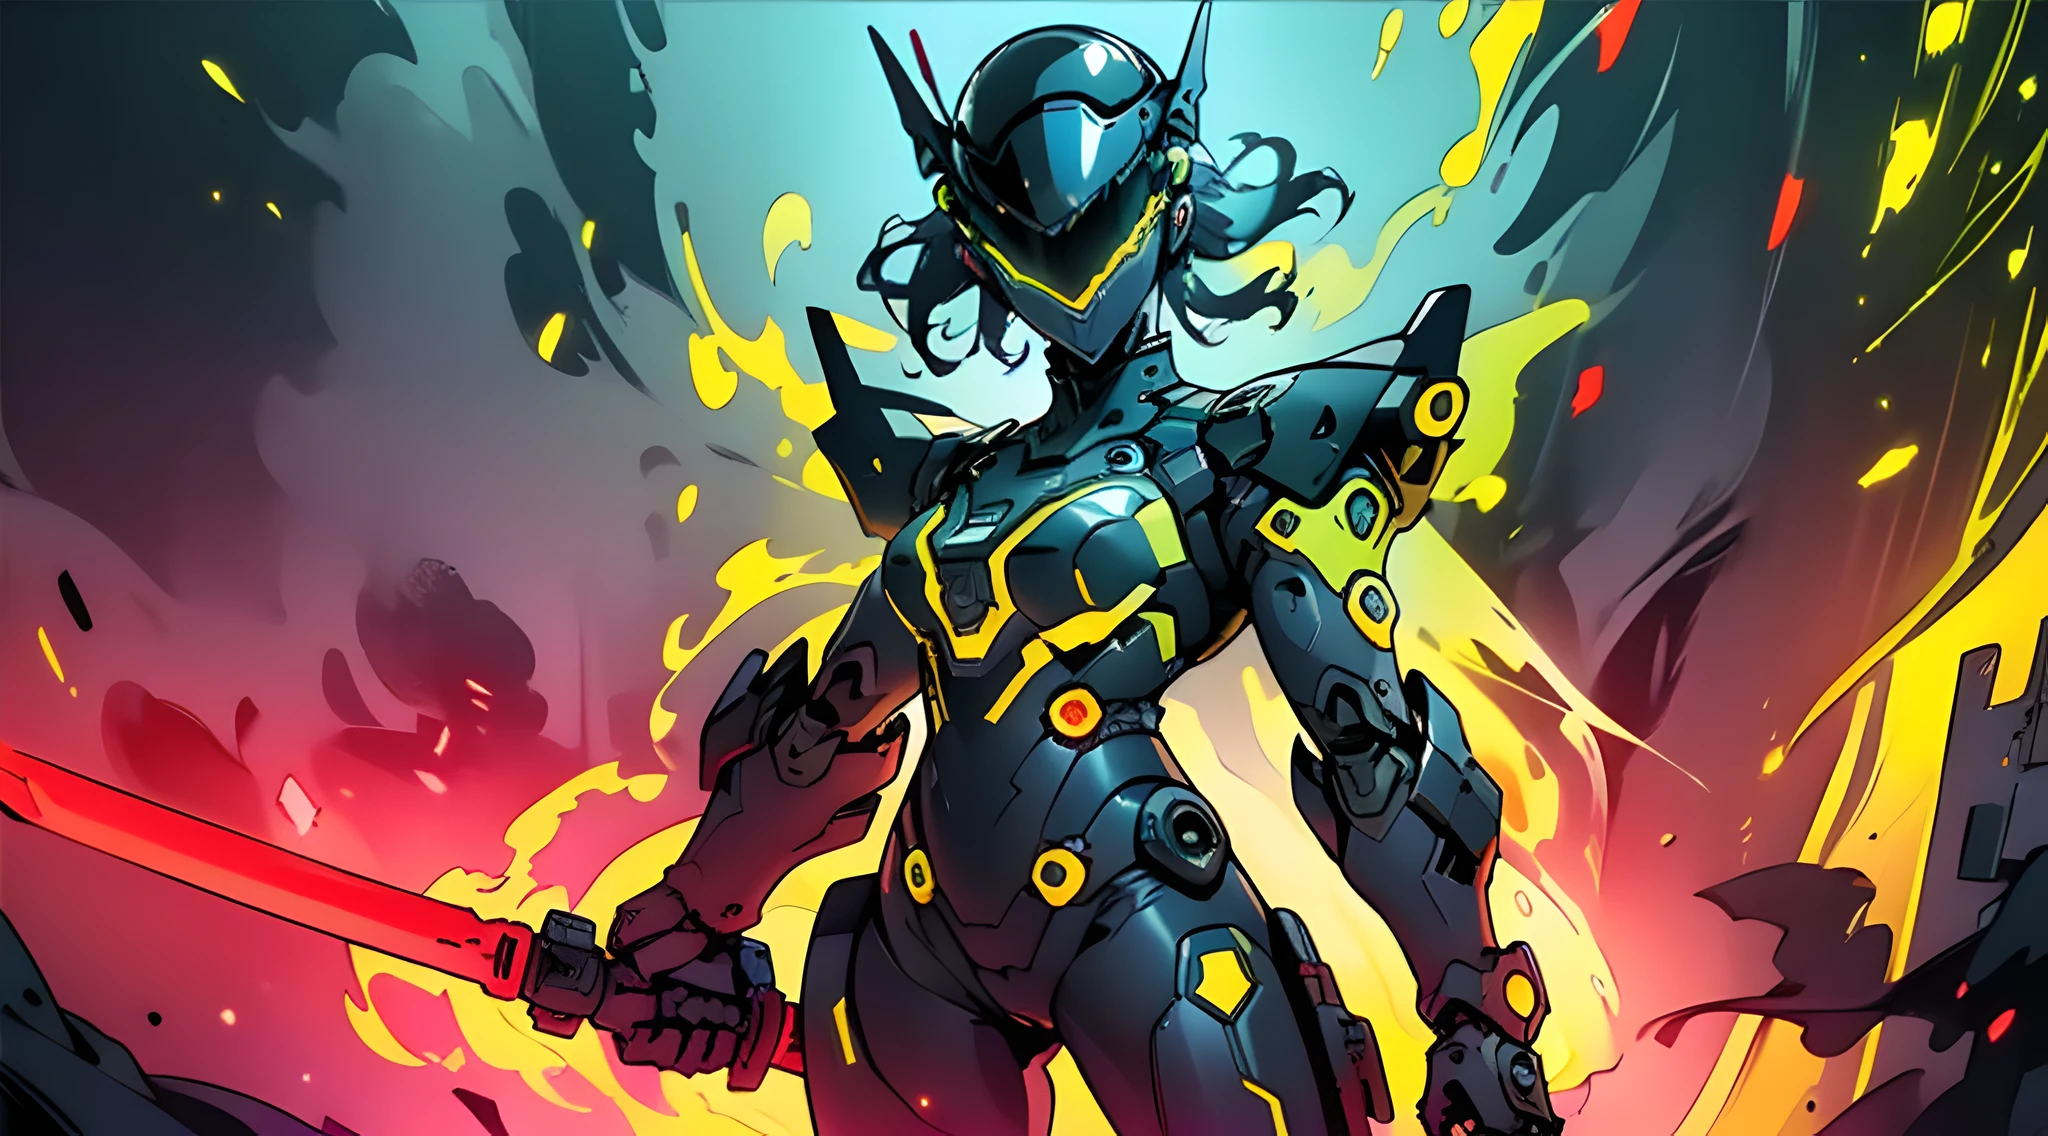 (((Masterpiece)), ((Best Quality)), 8K, High Detail, Ultra Detail, a cool girl mecha wearing a V-shaped helmet, wearing a black and yellow glowing mech suit, wielding a red glowing sword, battle pose action painting, background showing monster smoke.